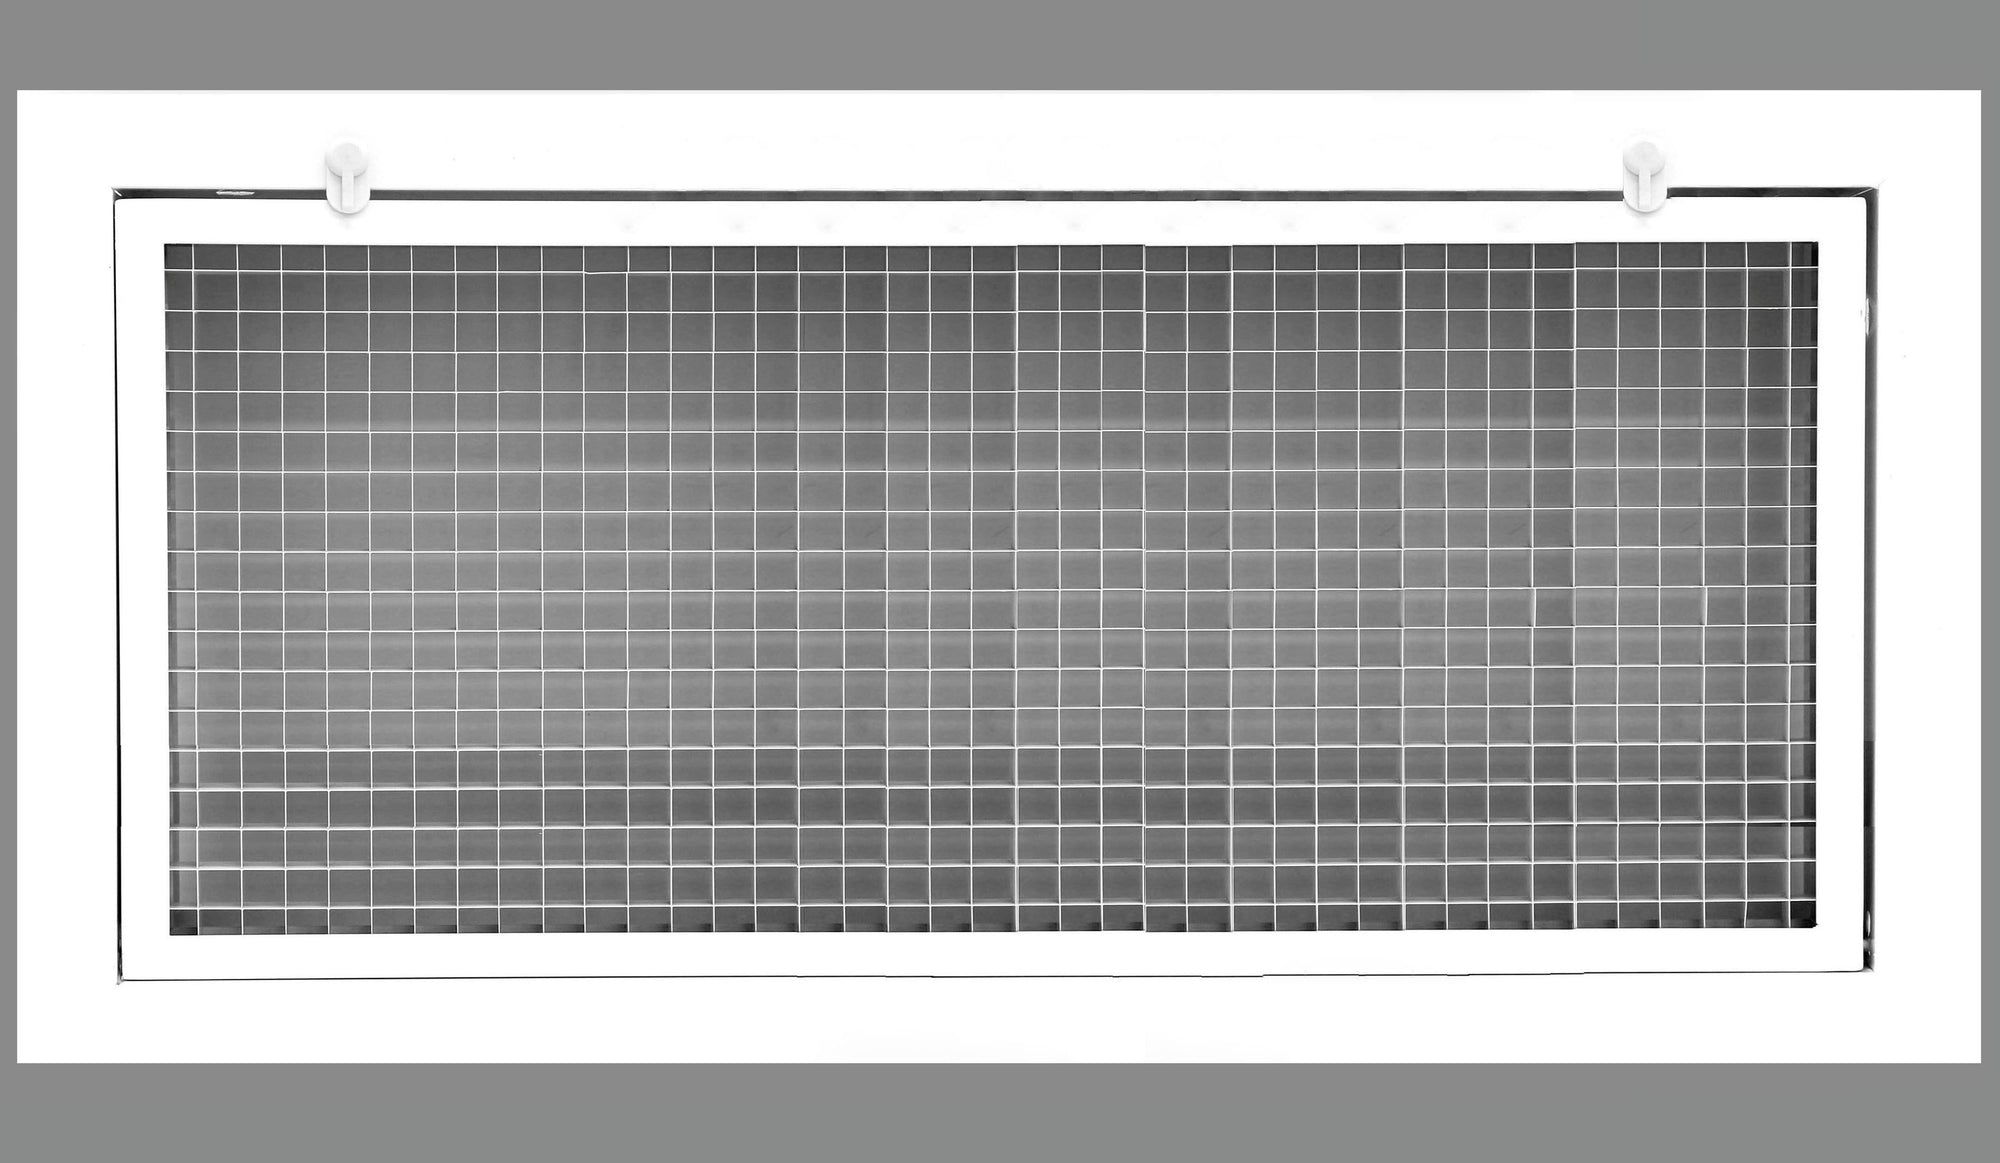 28" x 6" Cube Core Eggcrate Return Air Filter Grille for 1" Filter